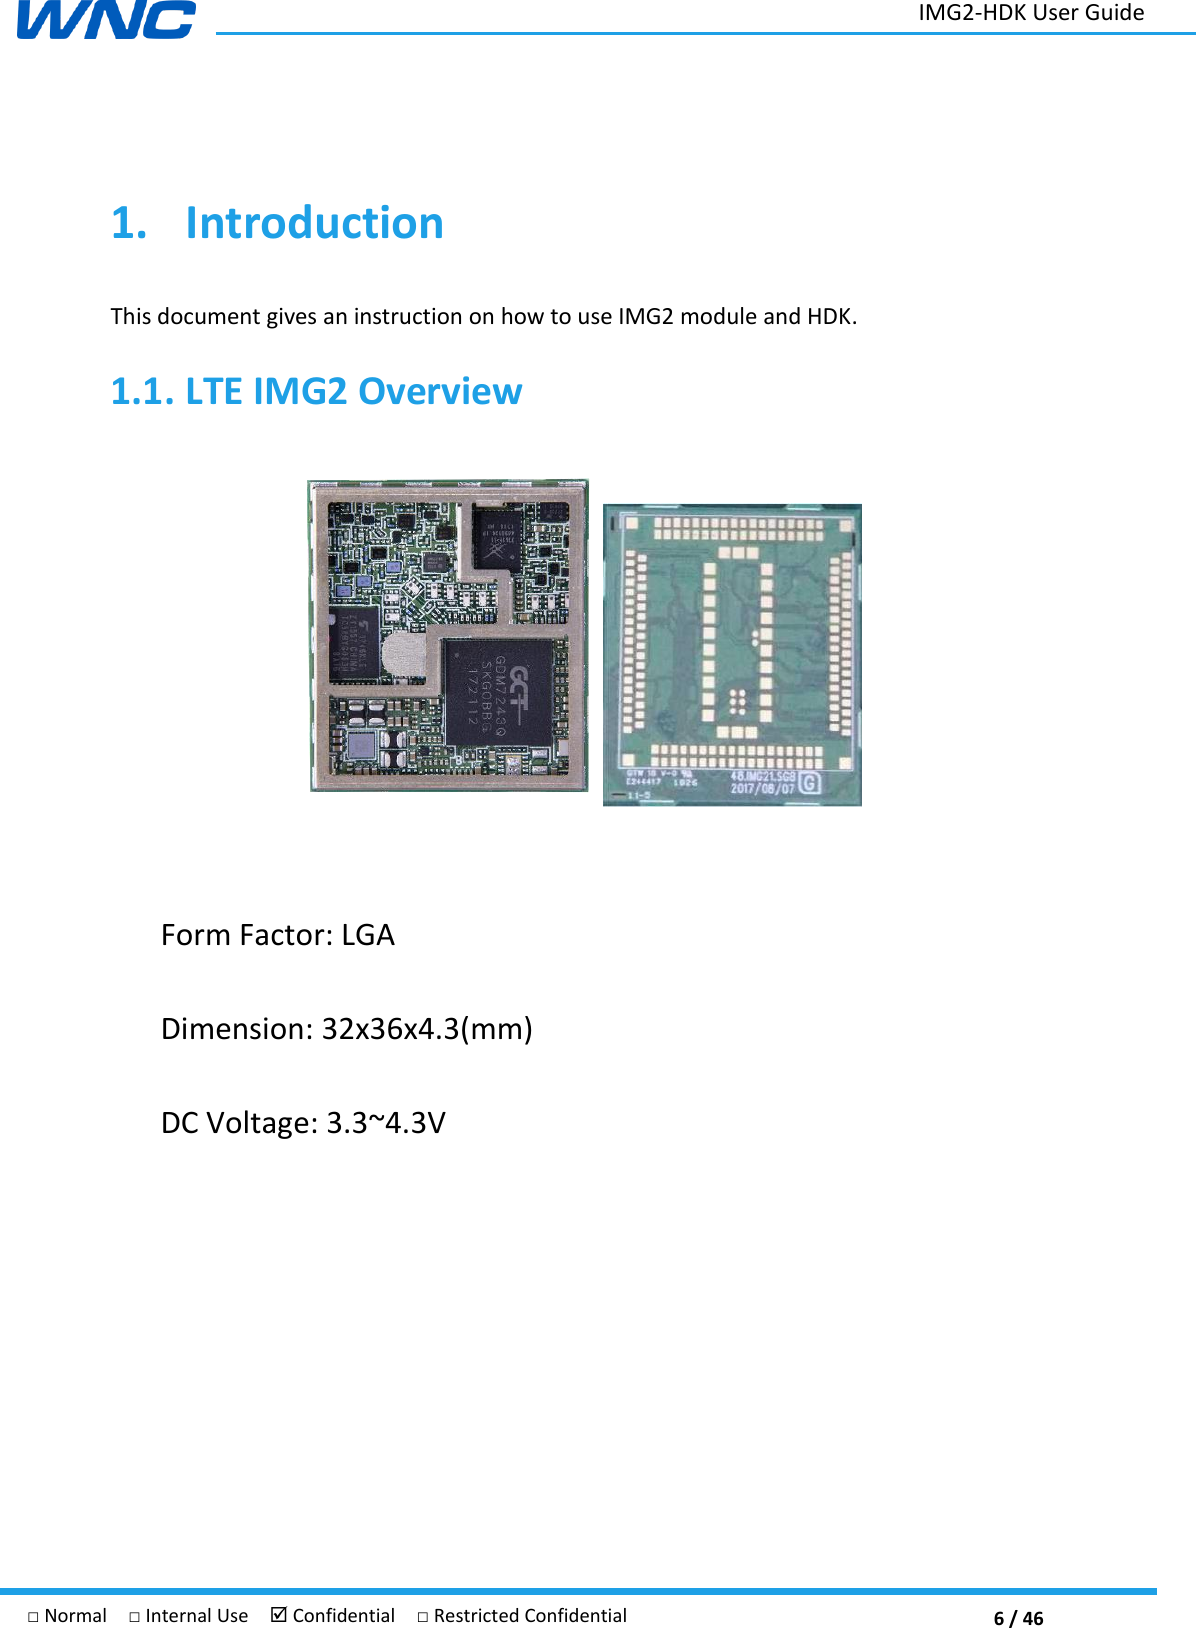  6 / 46 IMG2-HDK User Guide □ Normal  □ Internal Use   Confidential  □ Restricted Confidential 1. Introduction This document gives an instruction on how to use IMG2 module and HDK. 1.1. LTE IMG2 Overview     Form Factor: LGA   Dimension: 32x36x4.3(mm) DC Voltage: 3.3~4.3V        